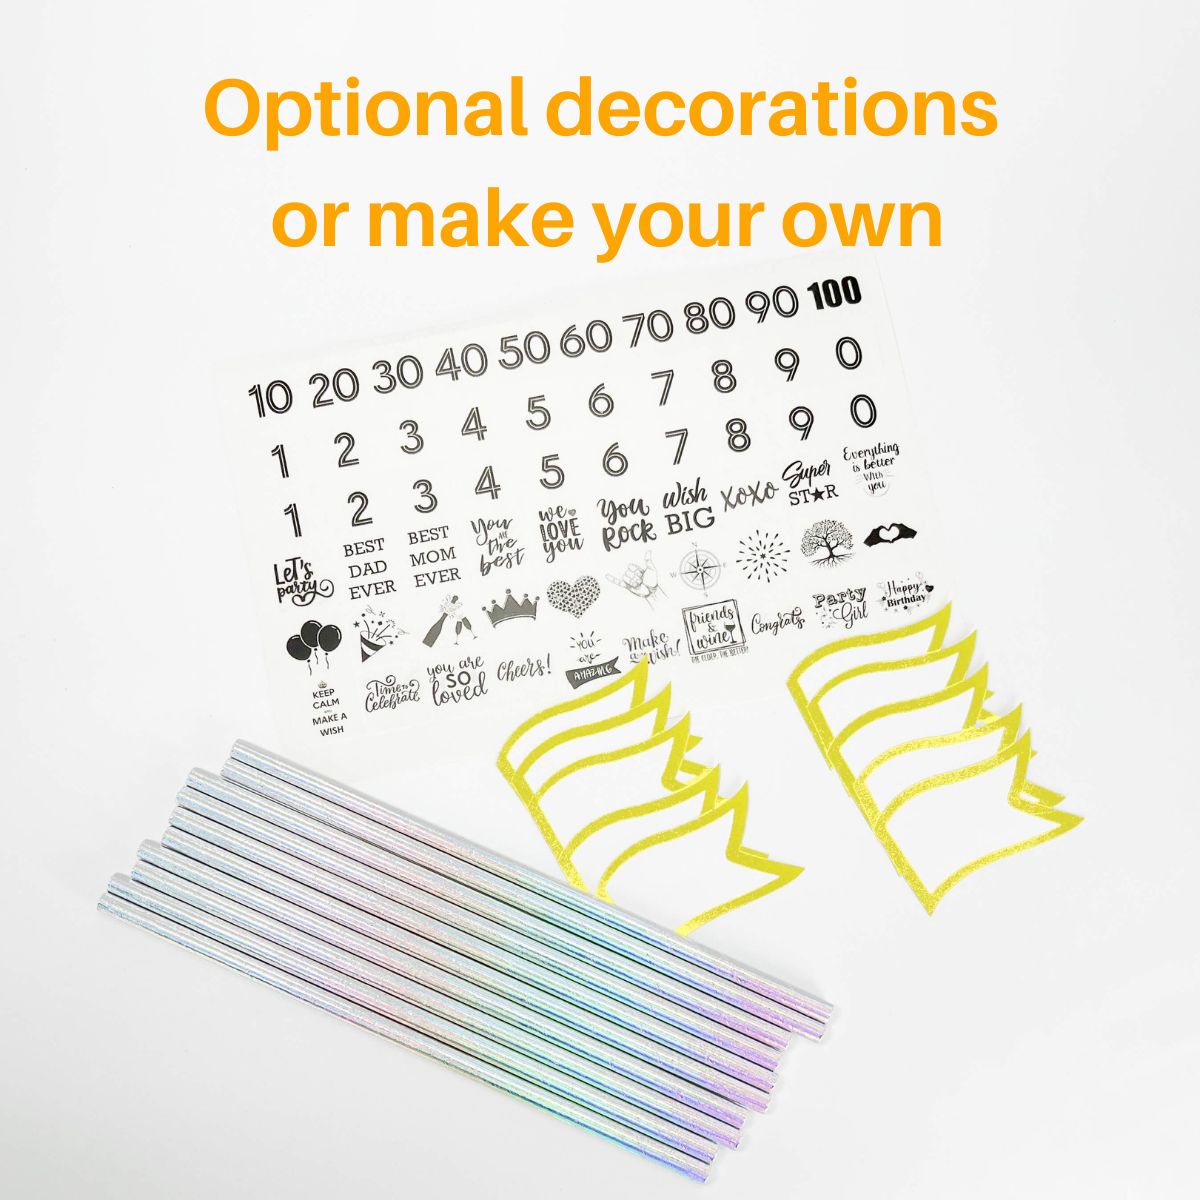 Stickers, mini-flags and flagpoles for options decorations